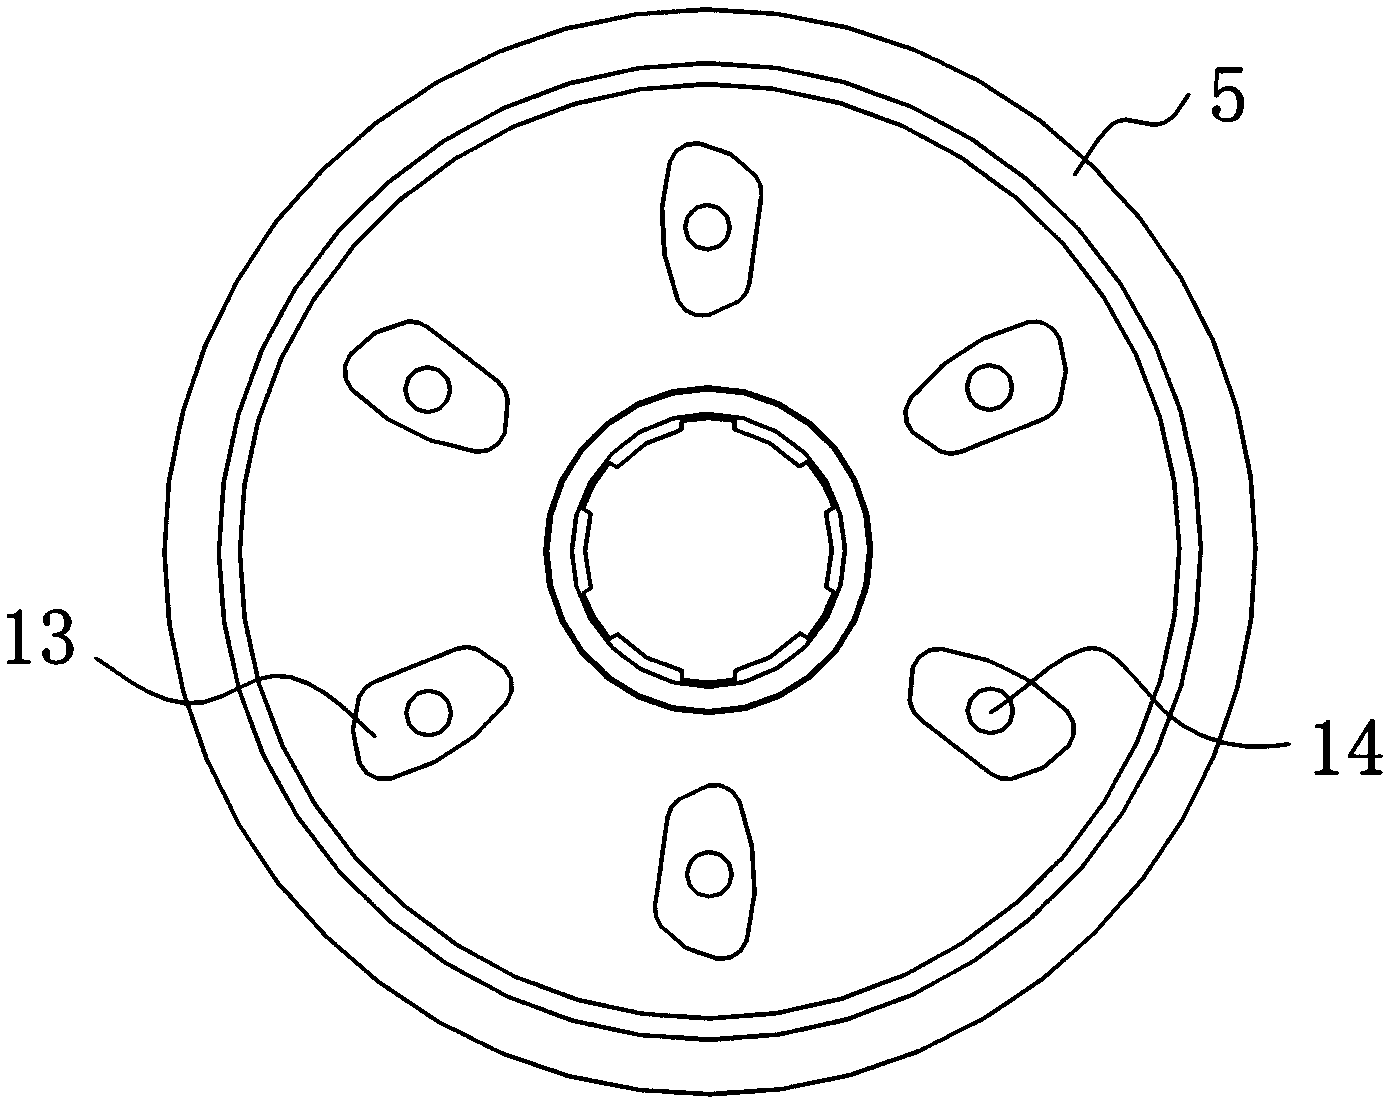 Novel clutch for tricycle